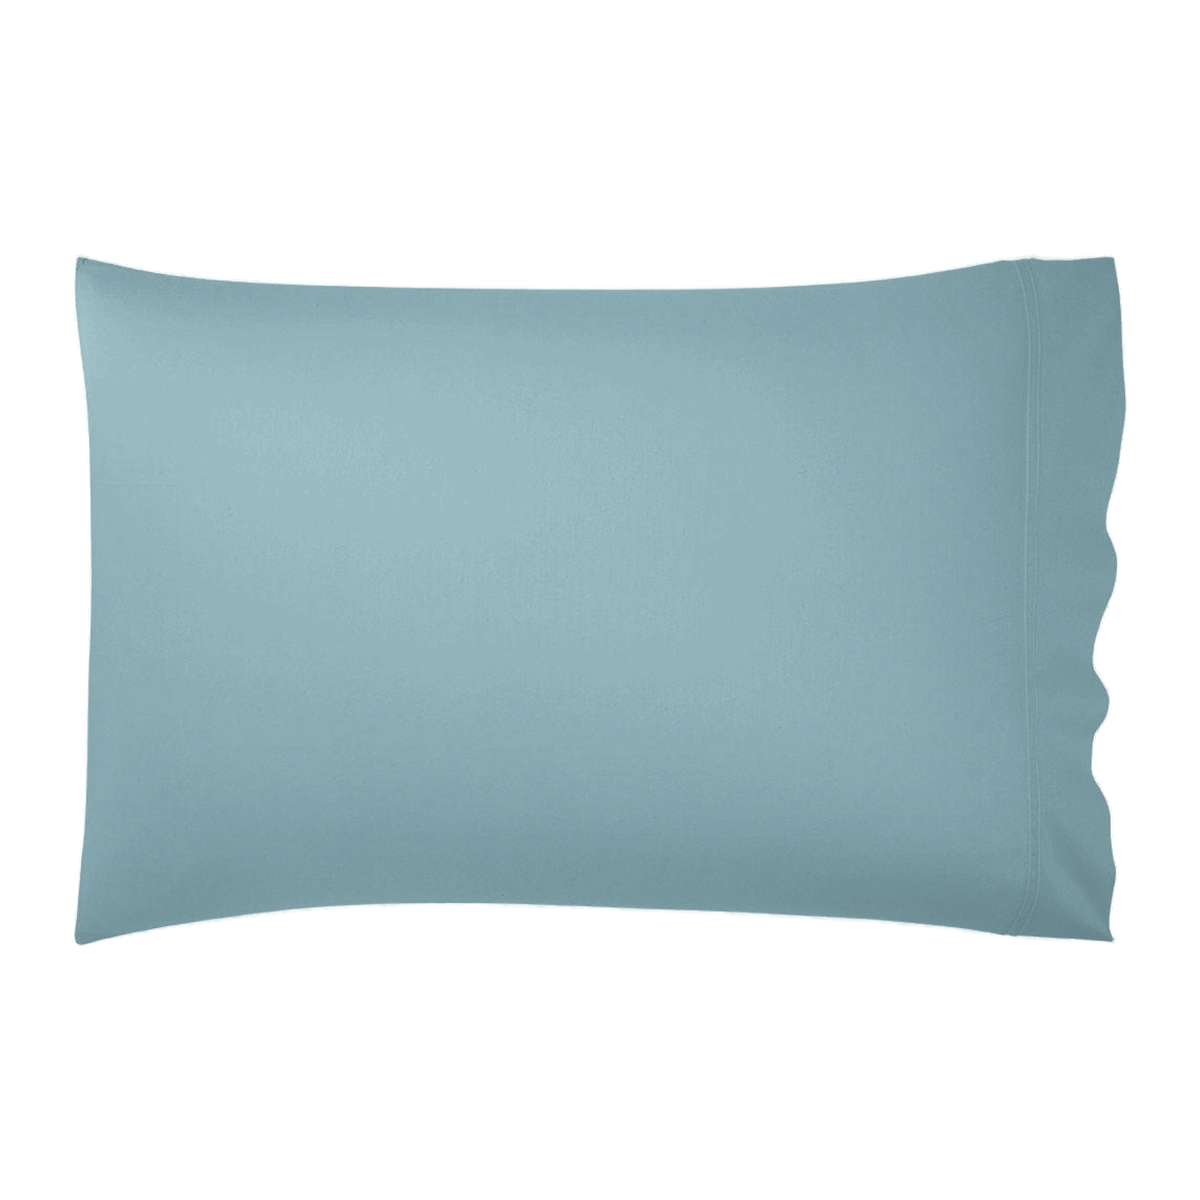 Pillowcase of Yves Delorme Triomphe Sheet Sets in Fjord Color